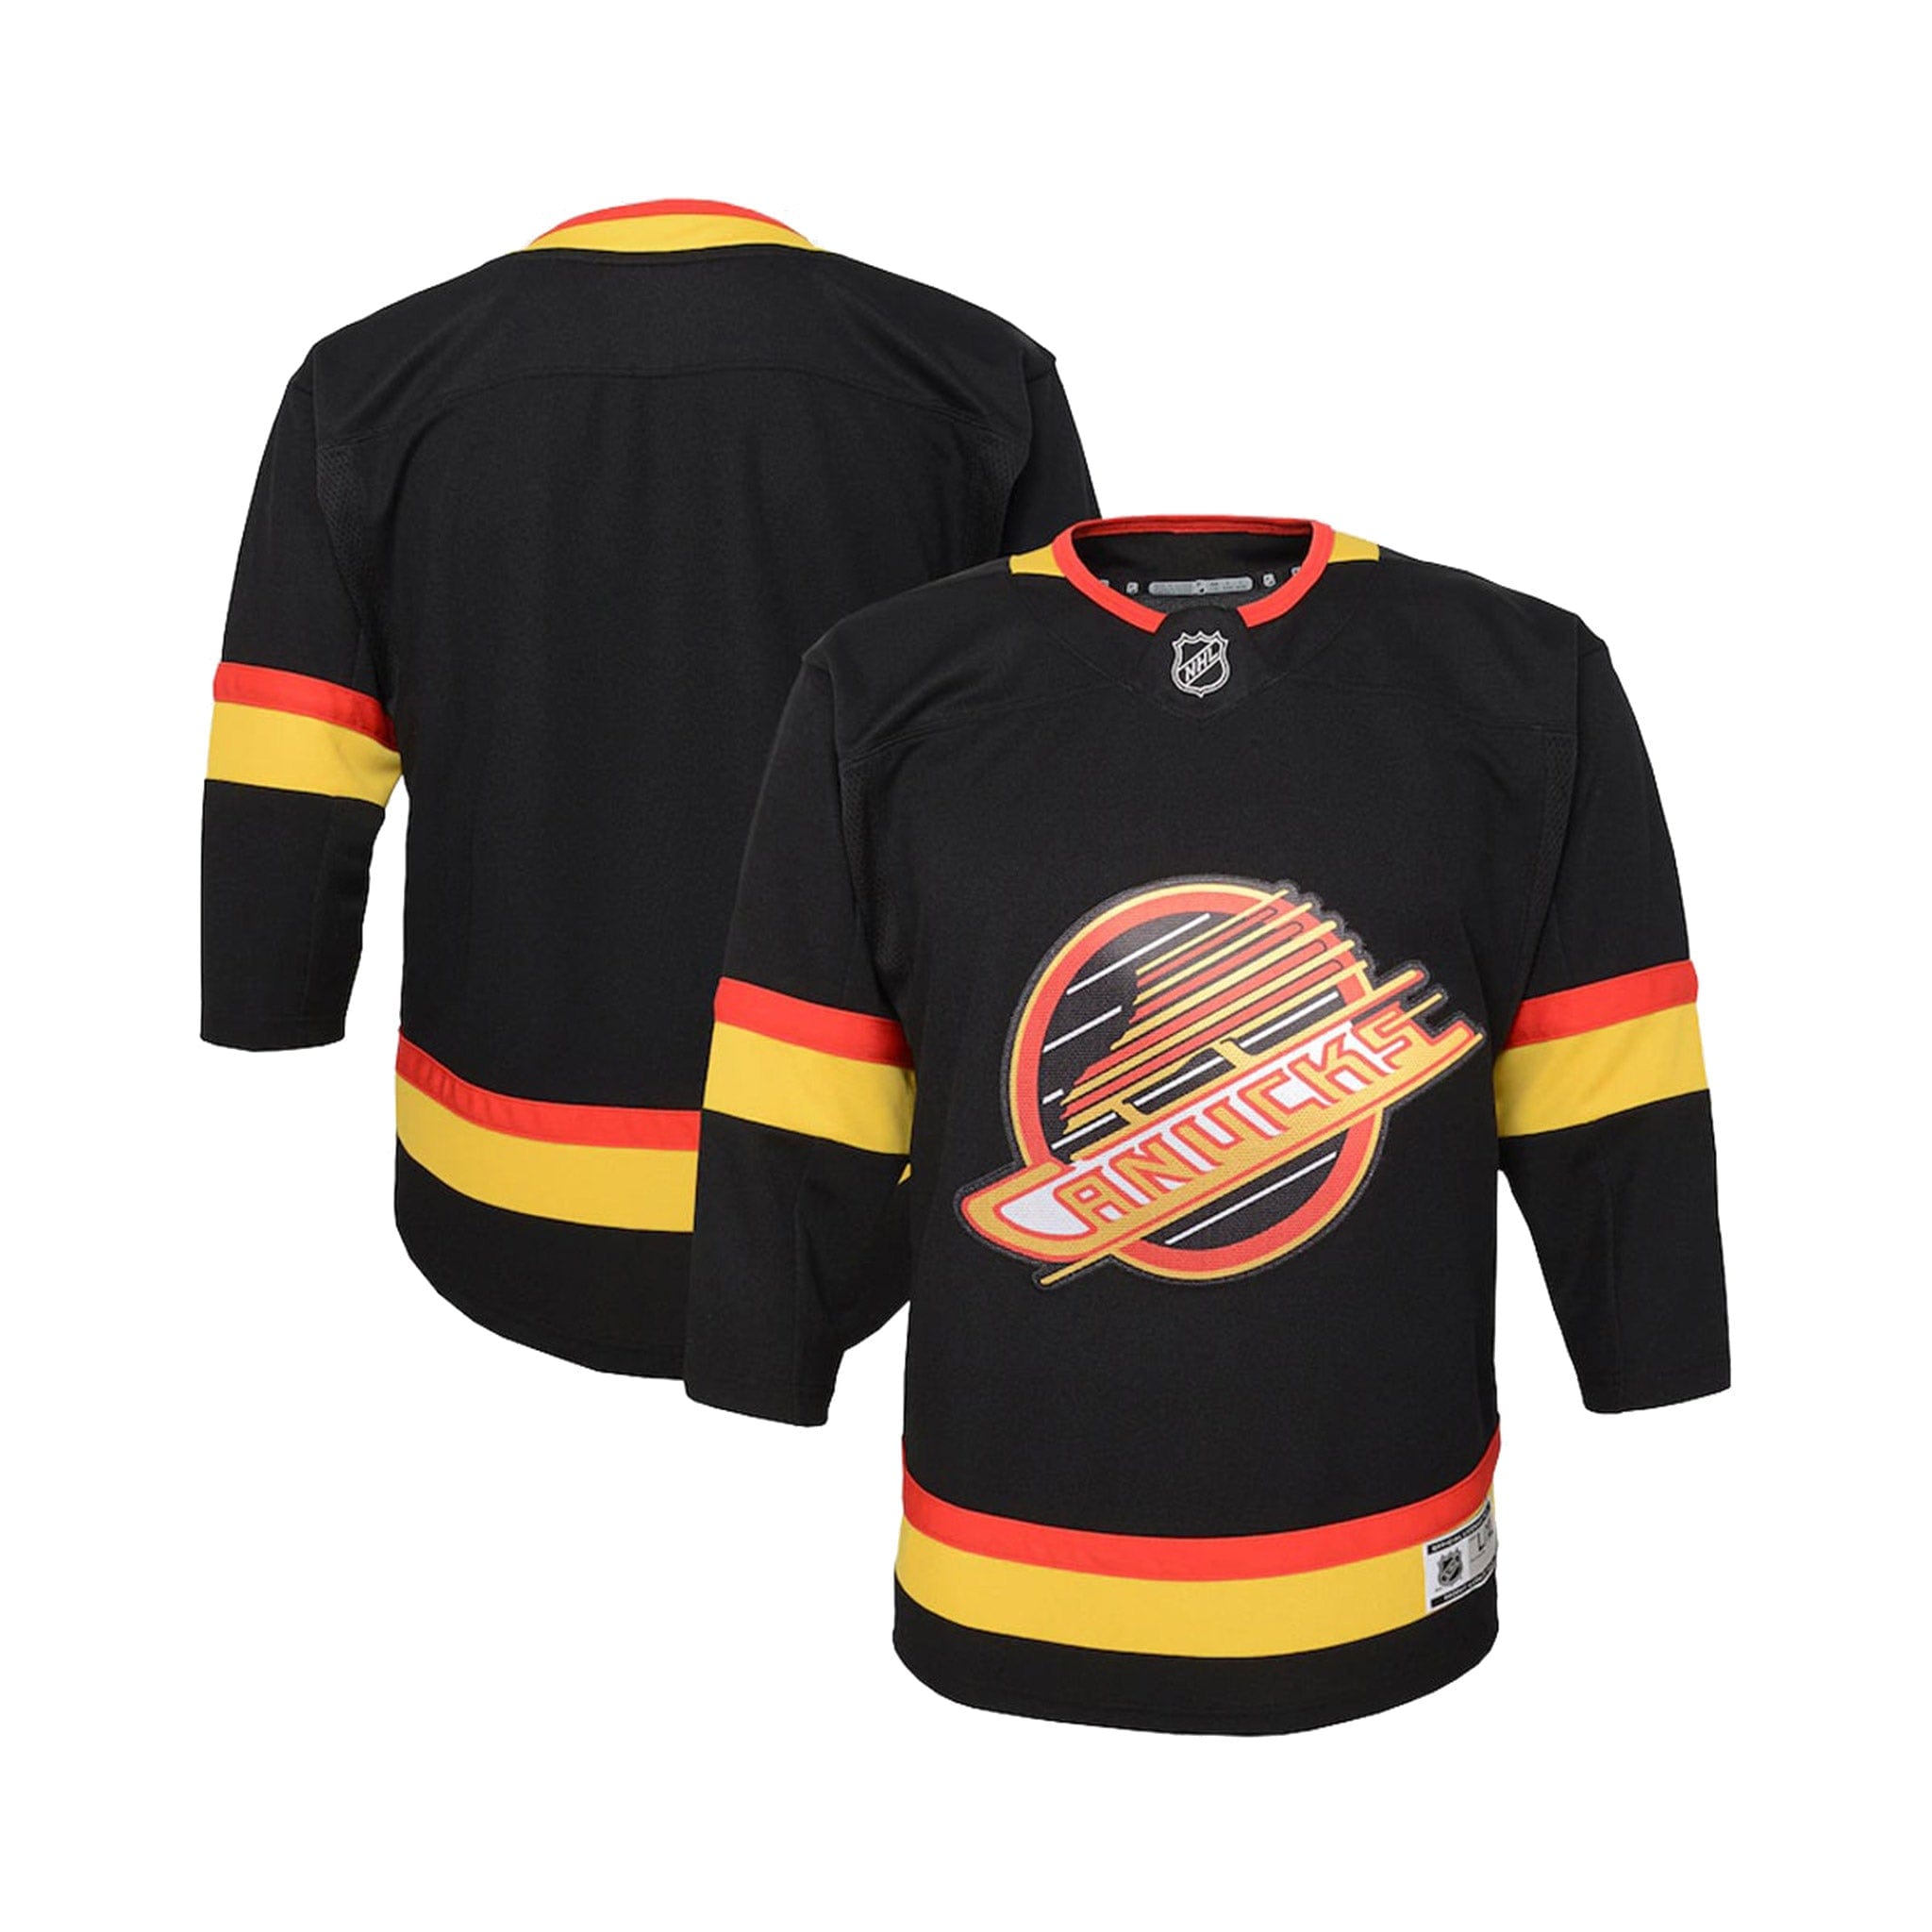 Outerstuff Reverse Retro Premier Jersey - Florida Panthers - Youth